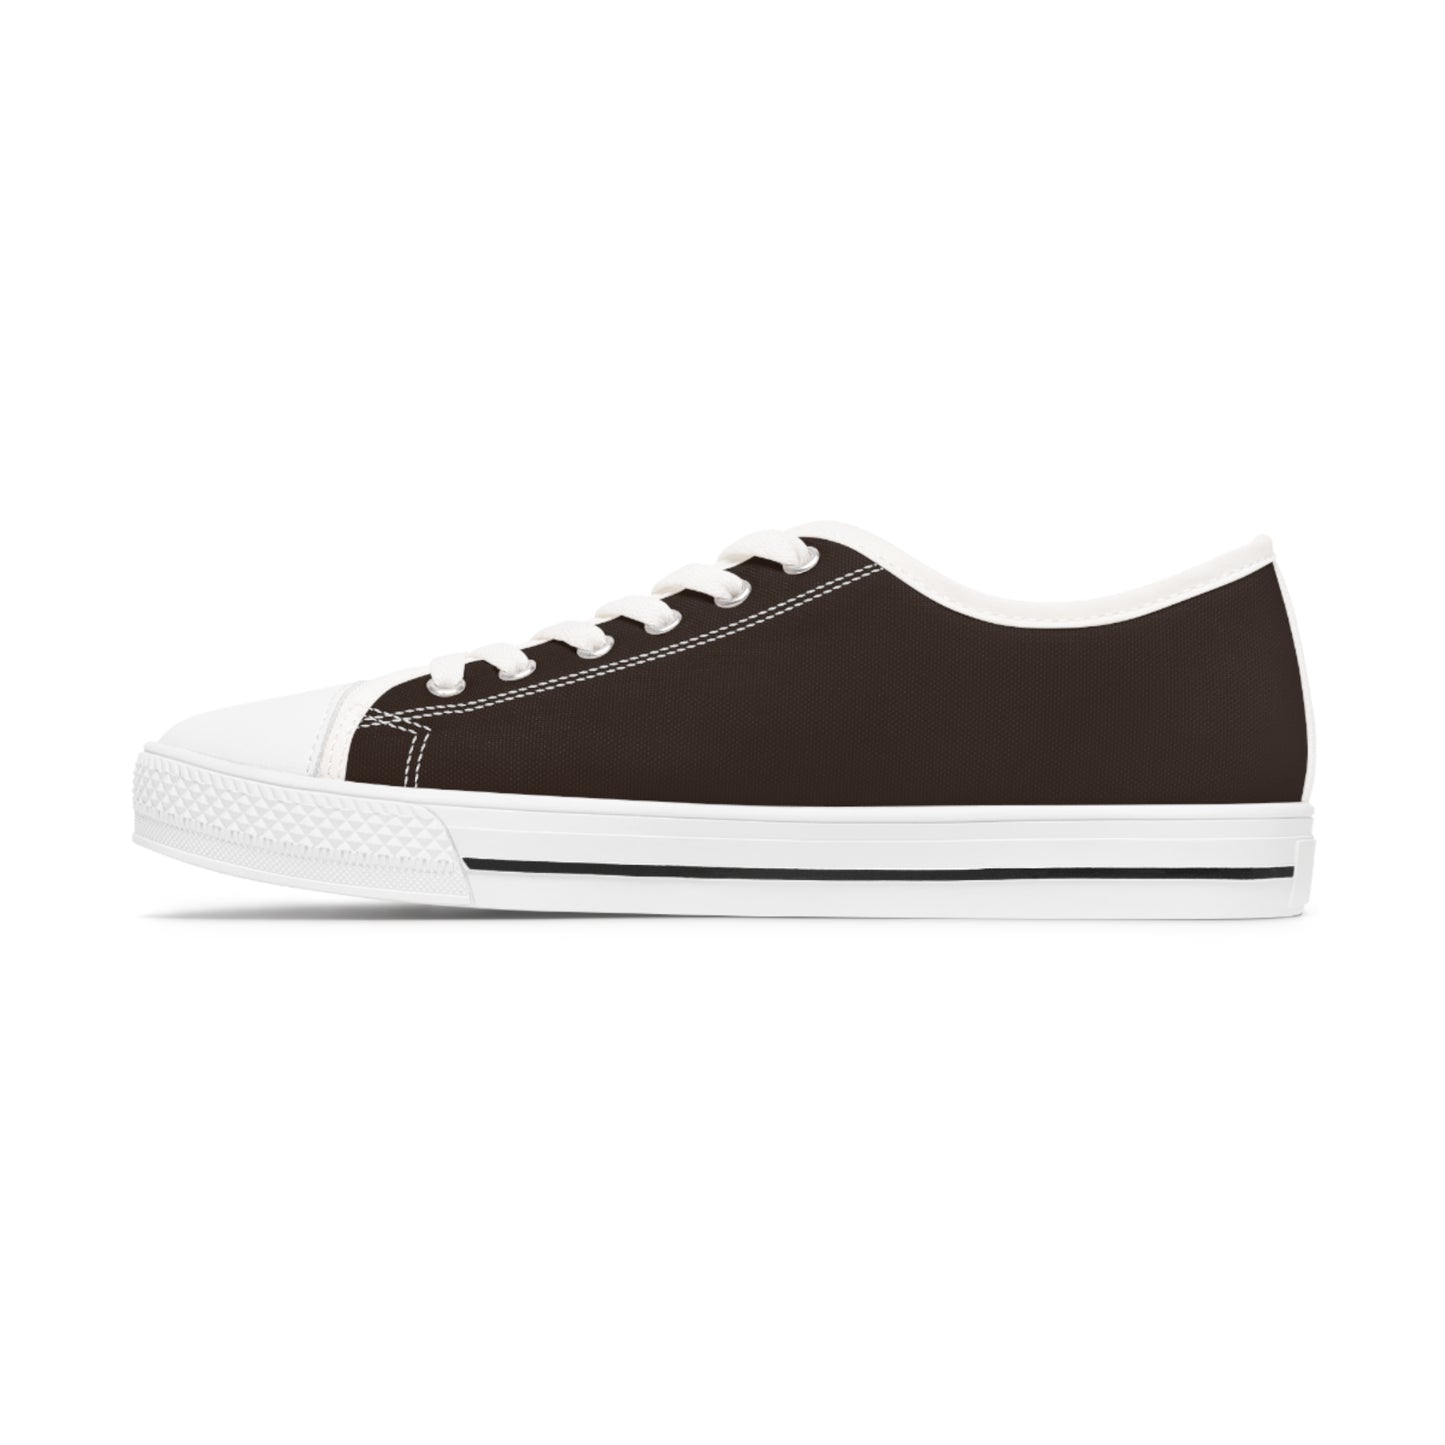 Women's Canvas Low Top Solid Color Sneakers - Chocolate Cherry US 12 White sole